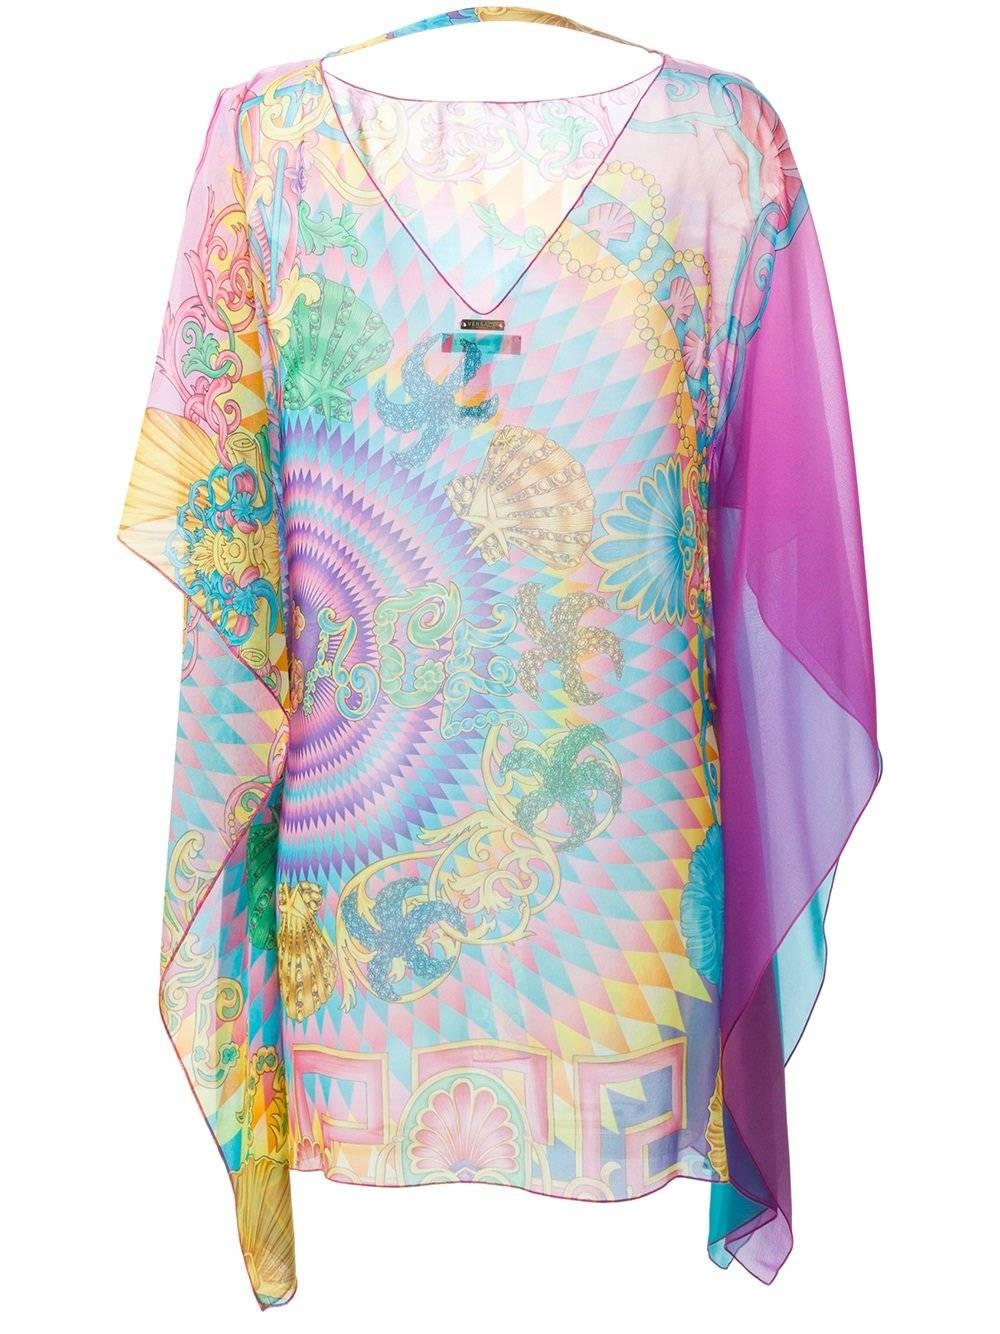 Versace

Multicolored silk sea world and digital barocco print sheer silk tunic dress. 

Details:
Material: 100% Silk
Color: Multi
Unlined
Made in Italy

IT Size 42 - US M

Length 33